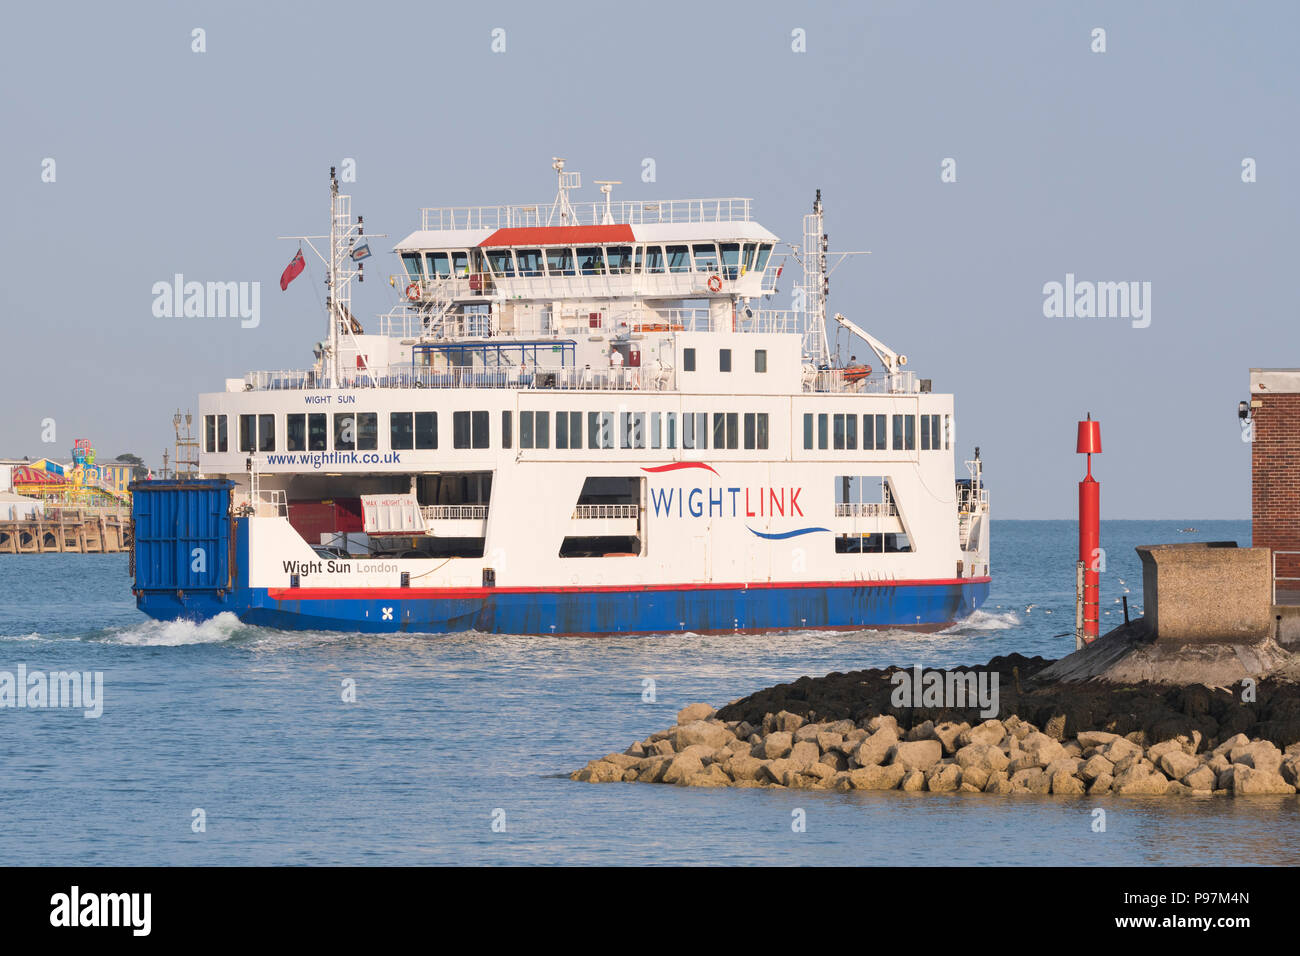 Wight Sun, a Wightlink passenger ferry, exiting Portsmouth Harbour into The Solent Strait (Solent Sea). Wightlink ship in Portsmouth, Hampshire, UK. Stock Photo